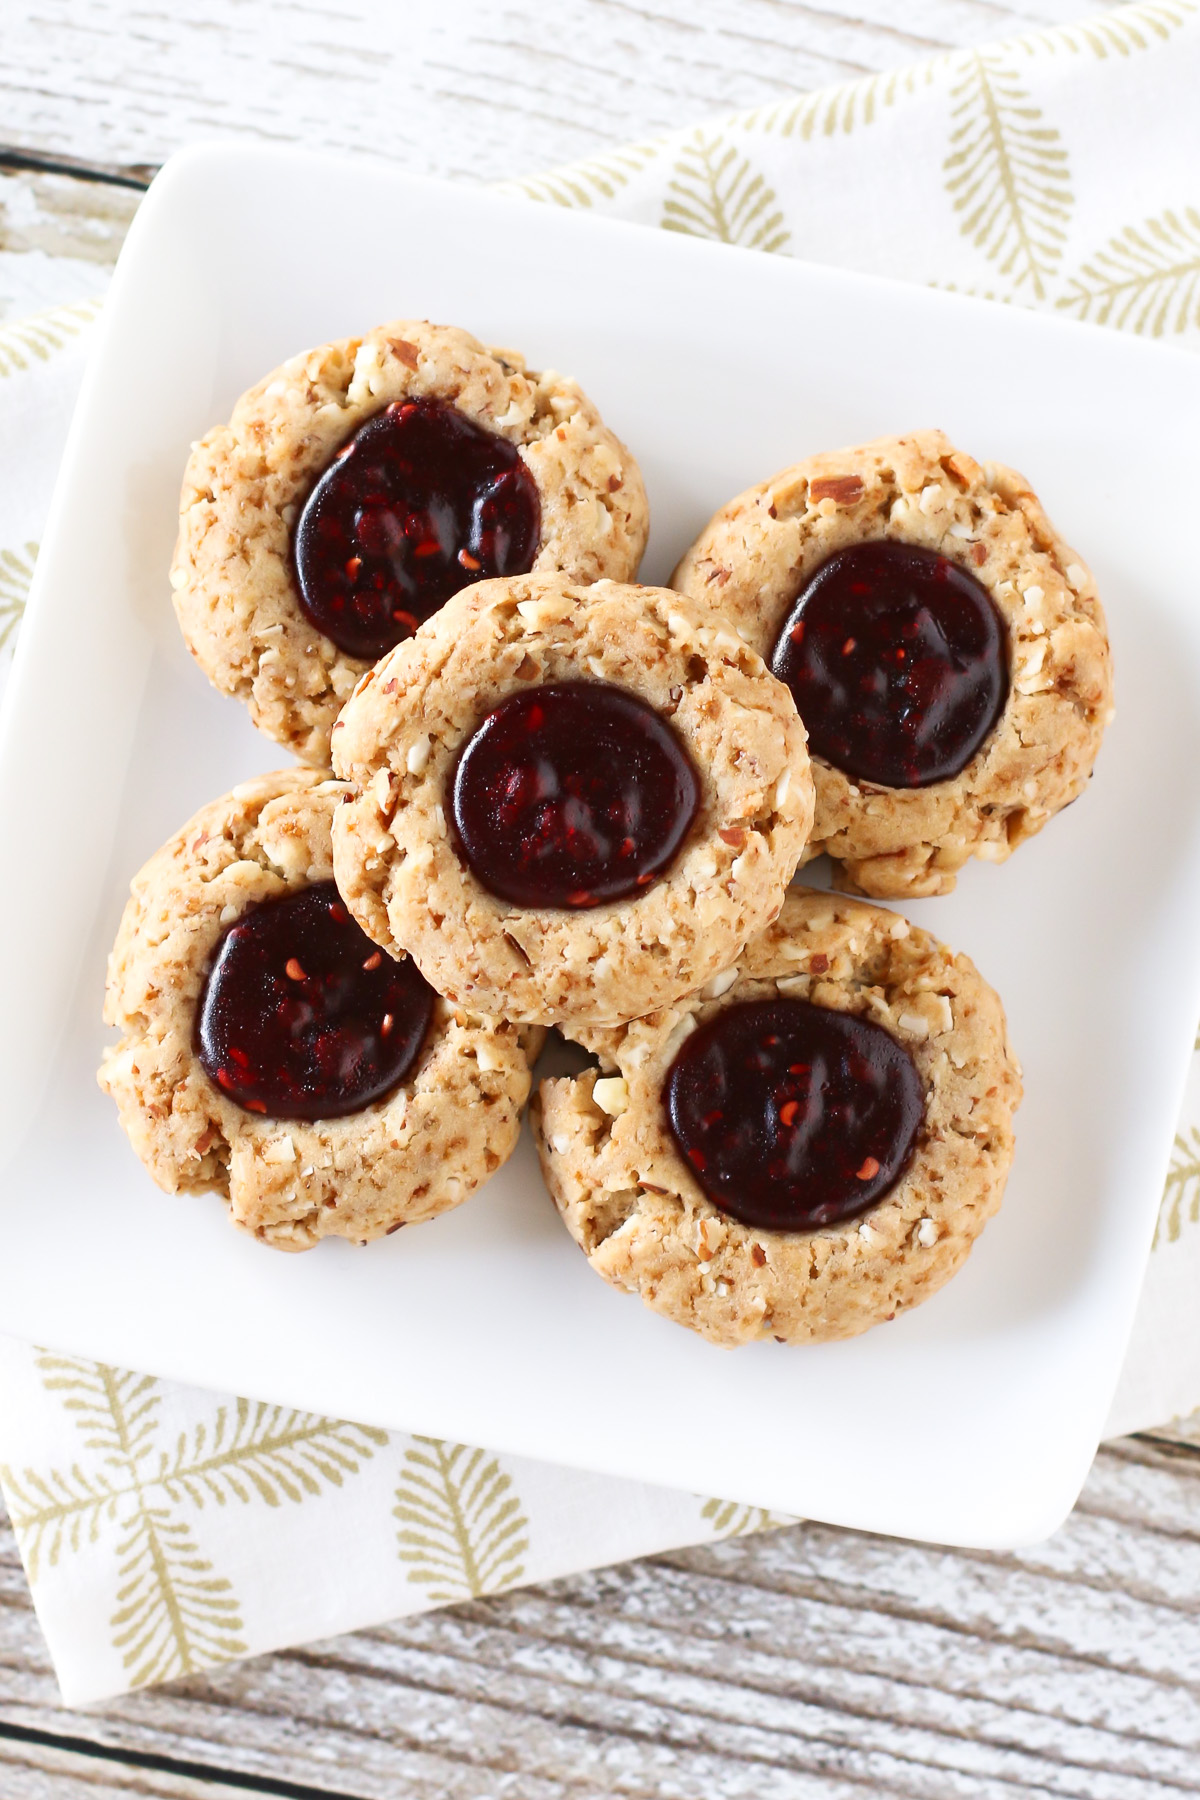 Gluten Free Vegan Raspberry Thumbprint Cookies. Tender almond cookies with a raspberry jam filling. A holiday classic!